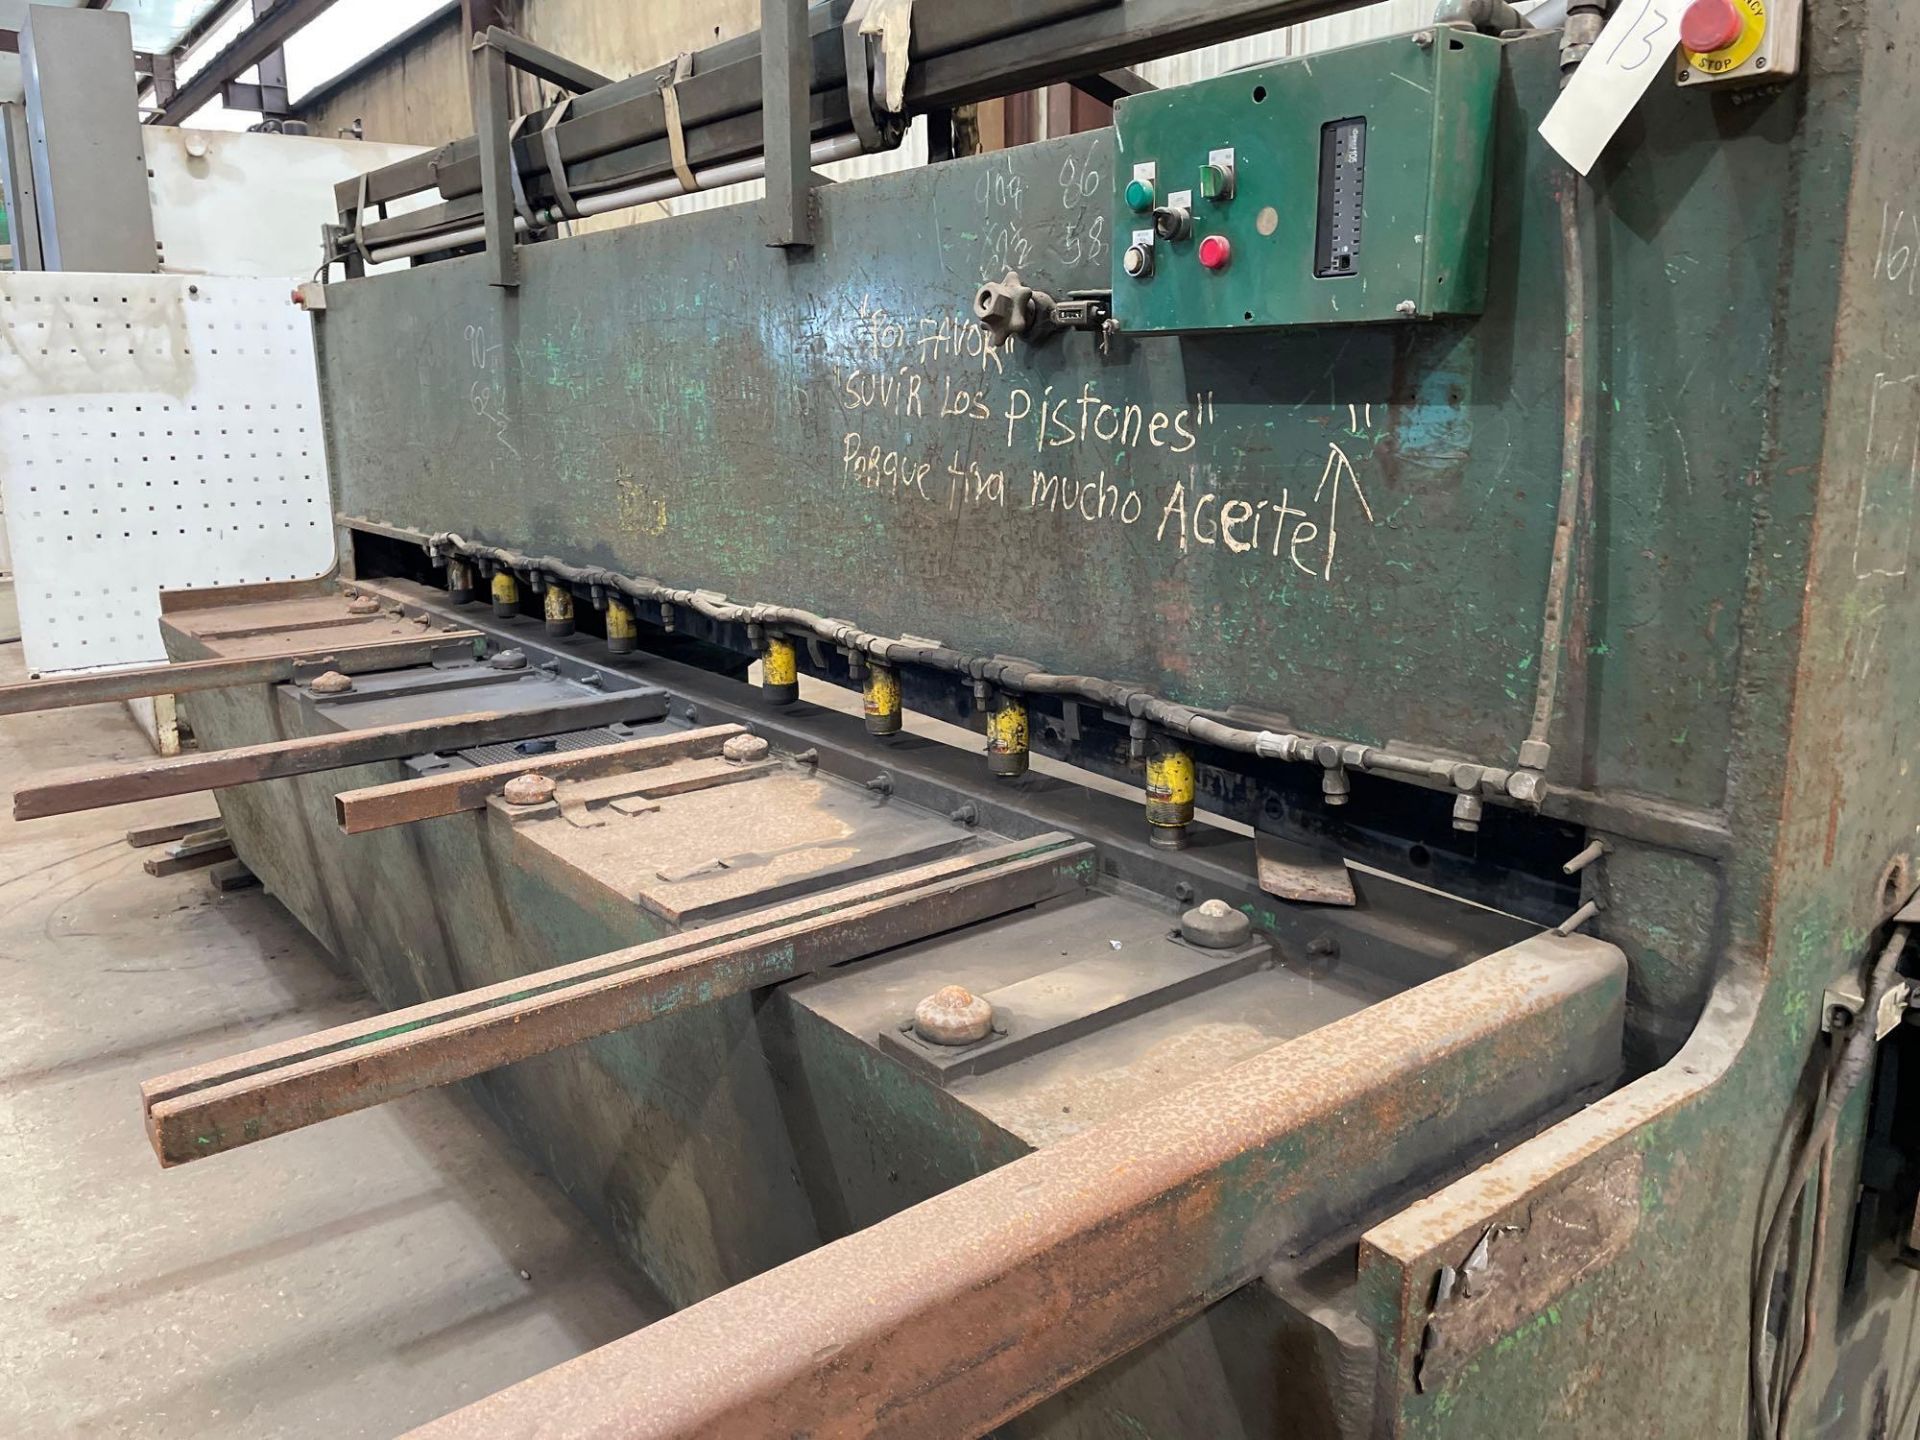 12’ Metal Cutting Shear, Brand N/A, with Direct Logic 105 Lito Controls - Image 5 of 9